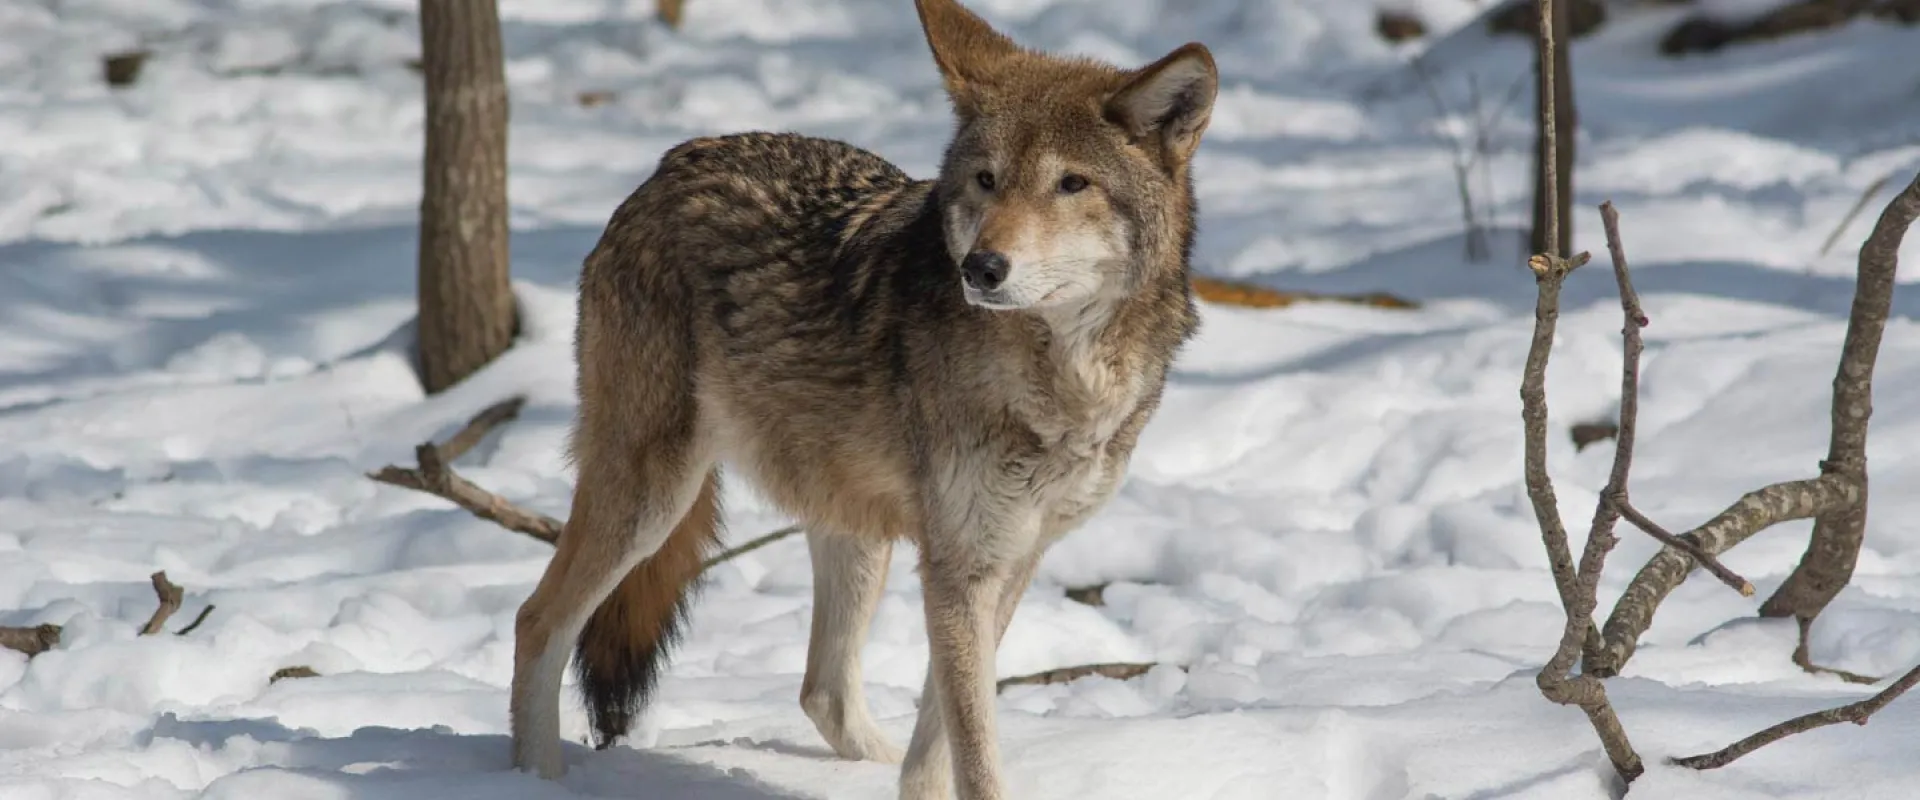 The American Red Wolf – Excerpt from Alive Magazine -  Winter 2019